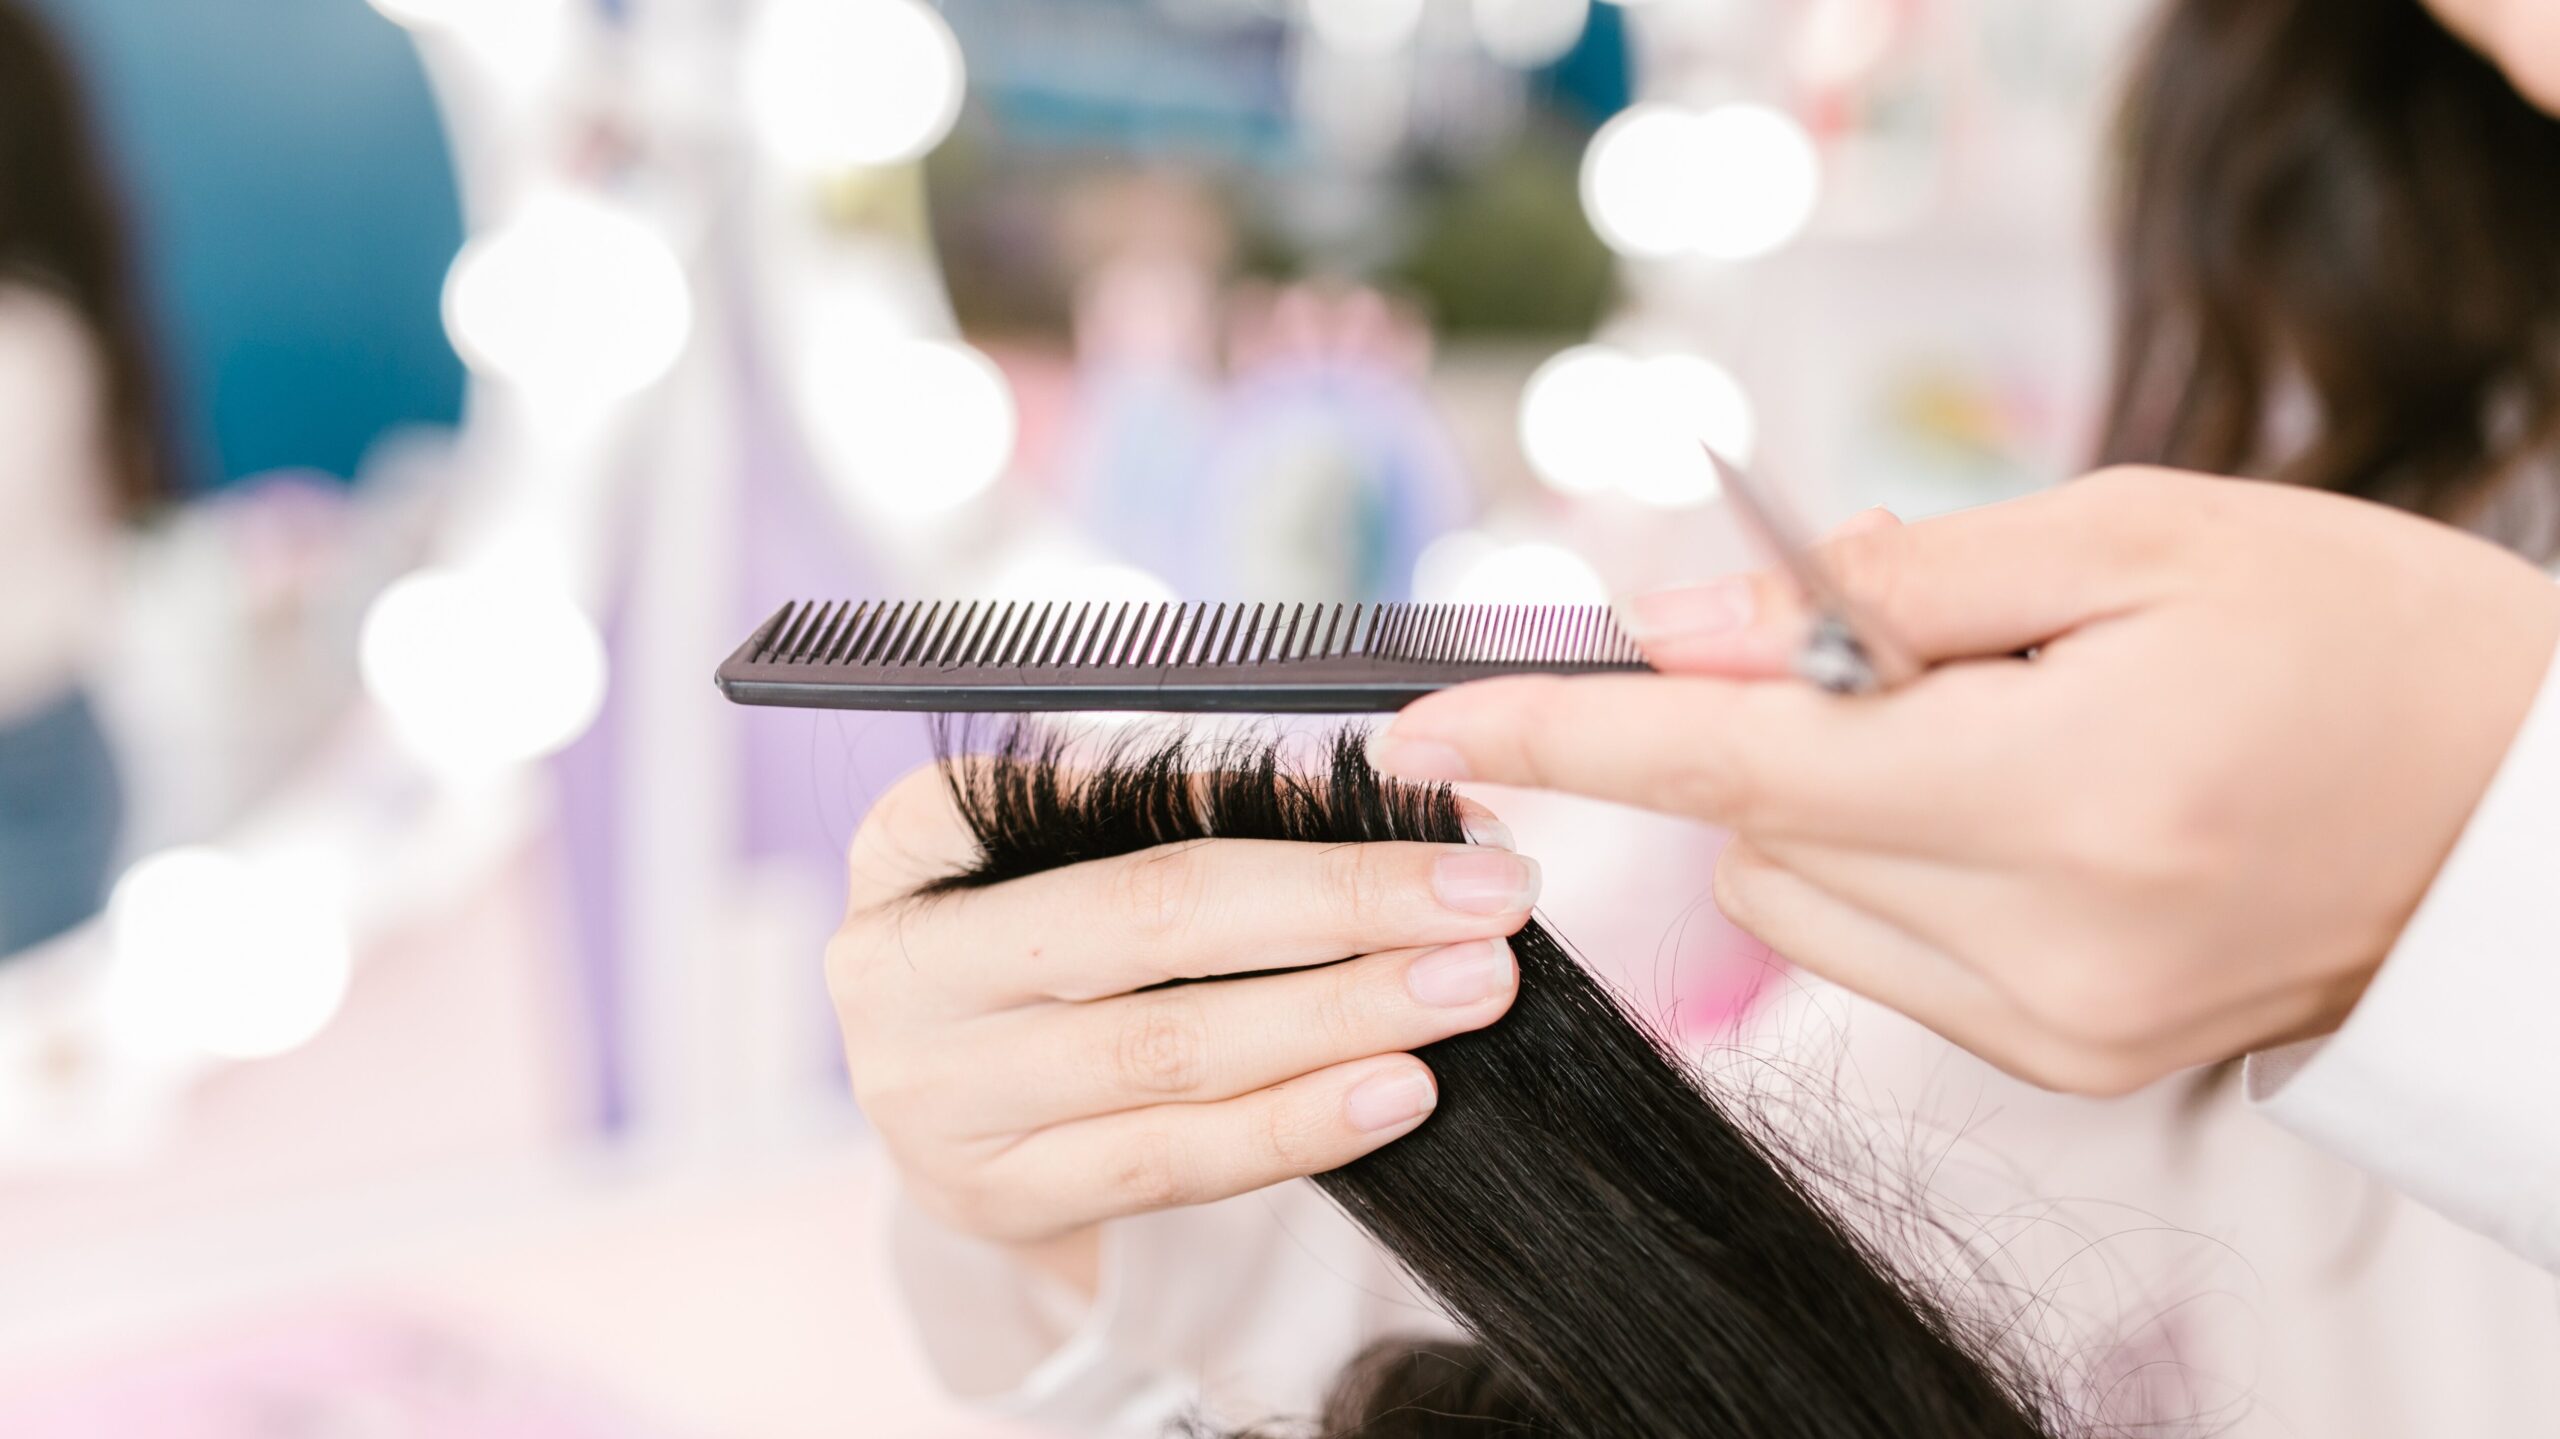 Hairdresser holding hair, comb and scissors